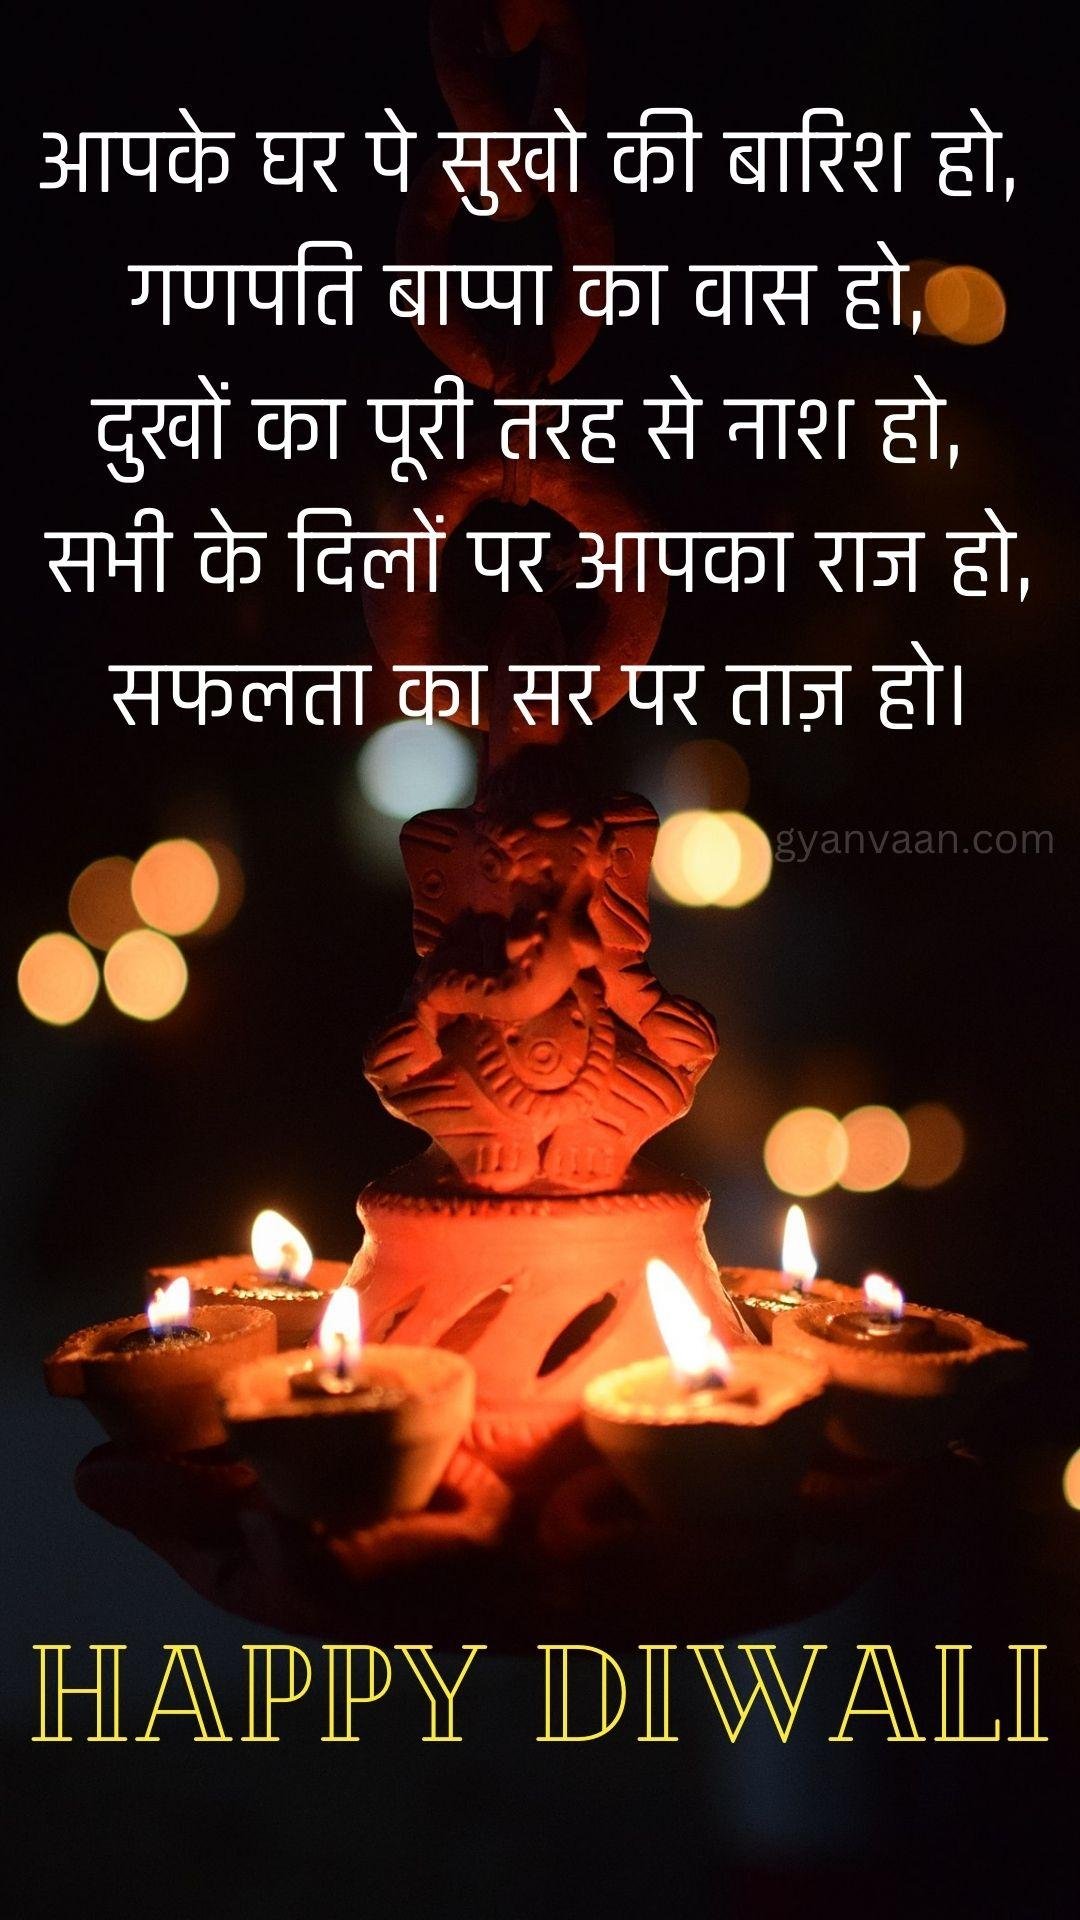 Diwali Quotes In Hindi With Wishes1 - Diwali Quotes In Hindi